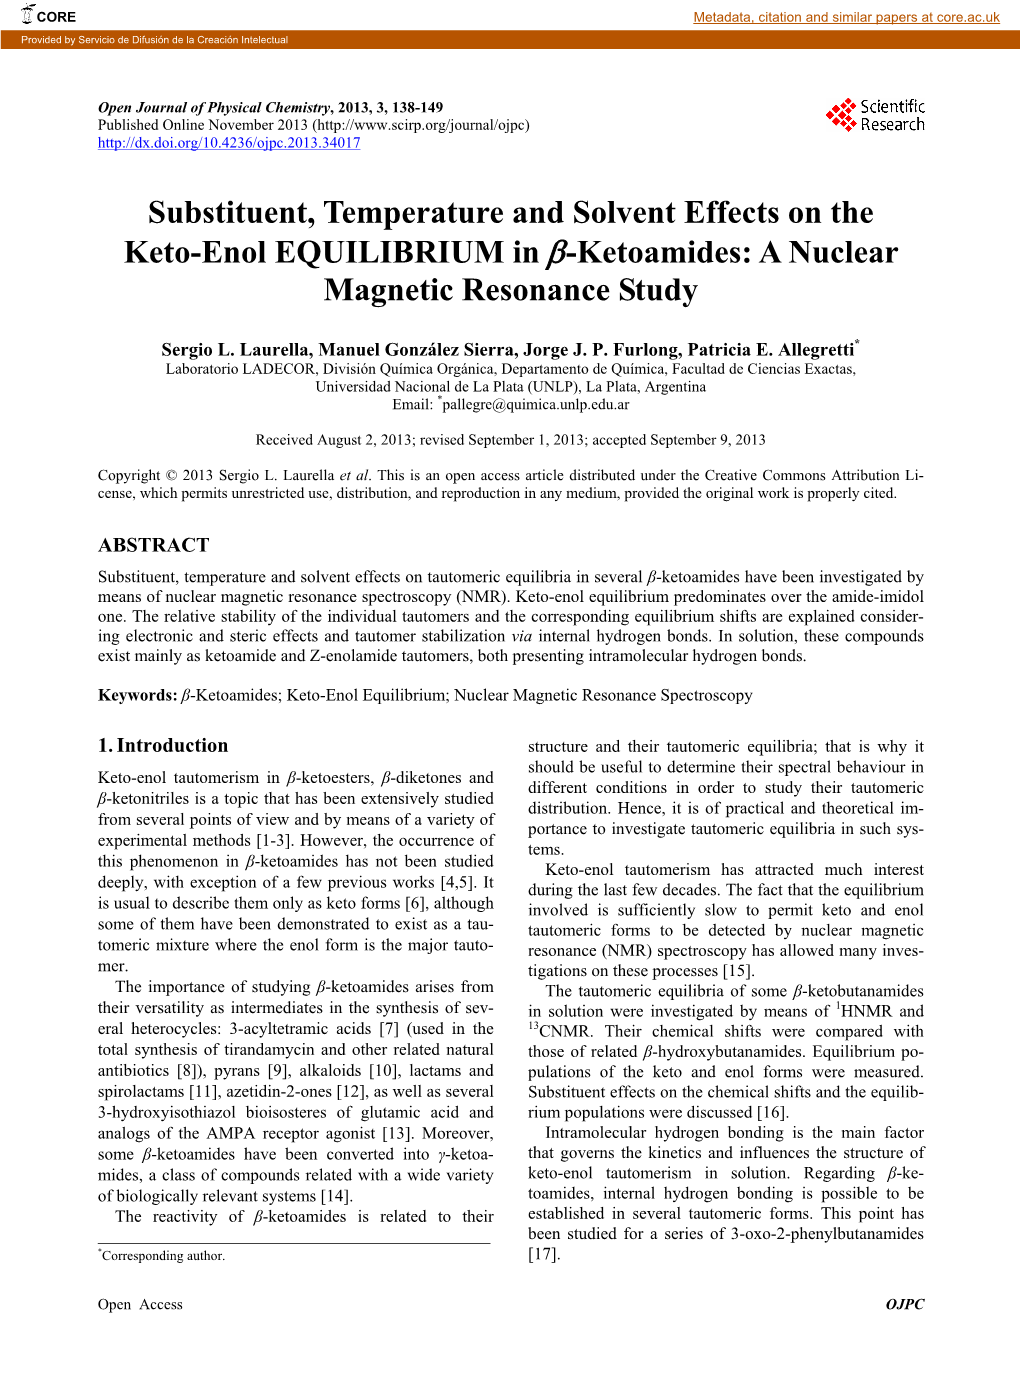 Substituent, Temperature and Solvent Effects on the Keto-Enol EQUILIBRIUM in -Ketoamides: a Nuclear Magnetic Resonance Study